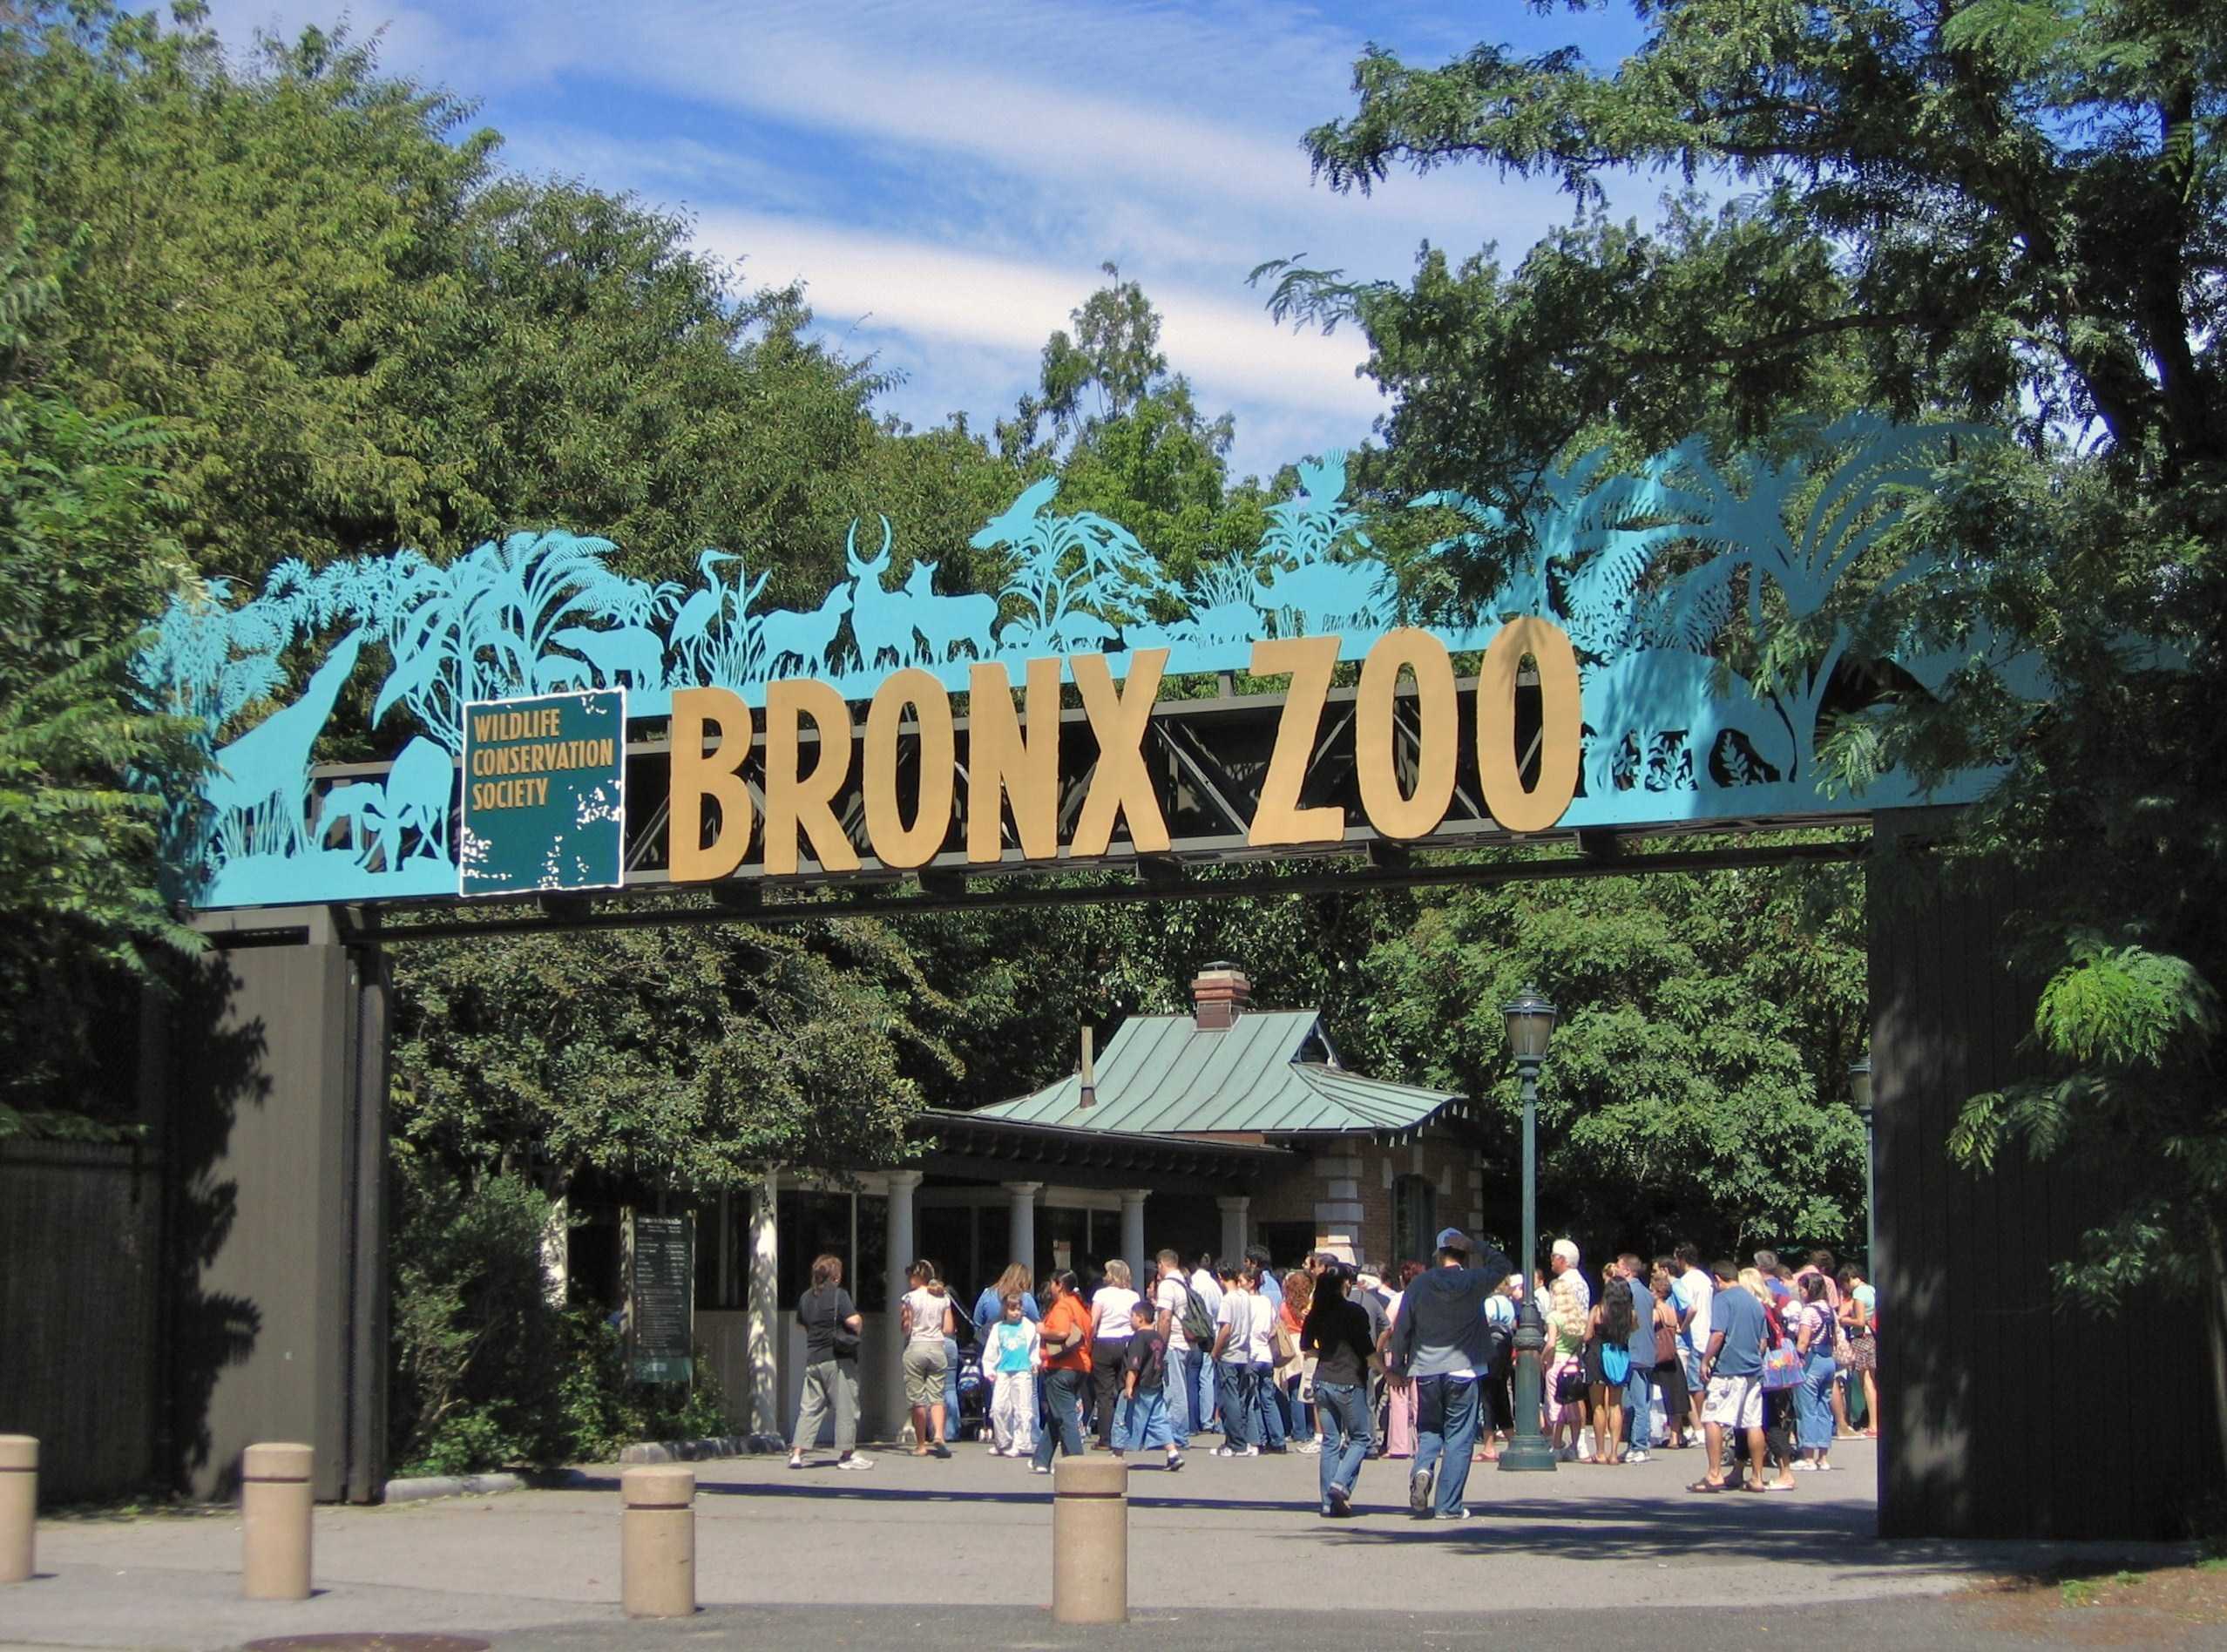 Bronx Zoo Sign, people standing underneath it